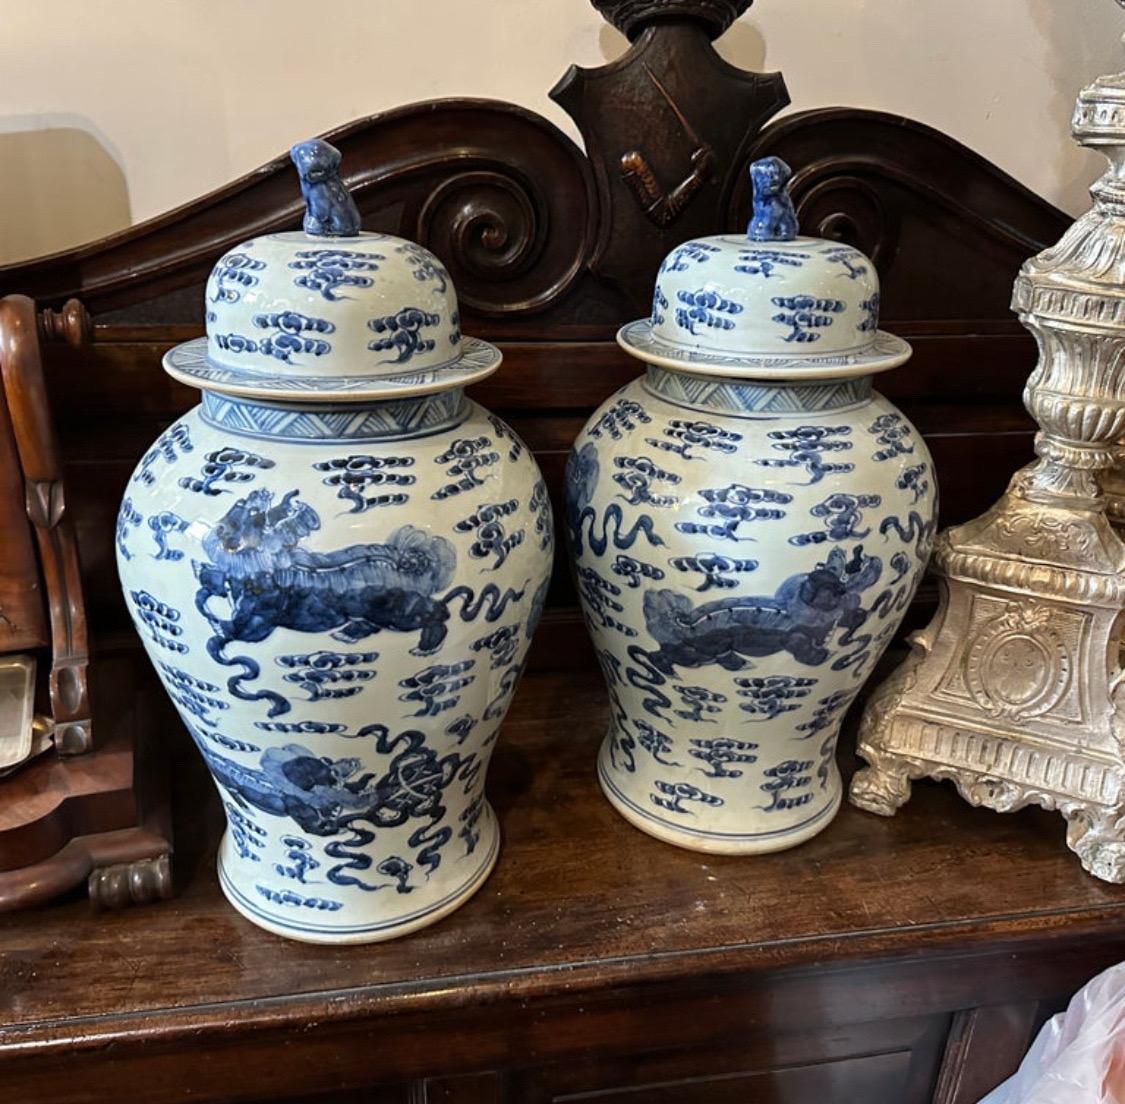 Crafted in China during the mid-20th century, these ginger jars exemplify the classic blue and white ceramic style that has been cherished for centuries. The jars are made of high-quality ceramic materials, known for their durability and beauty. The